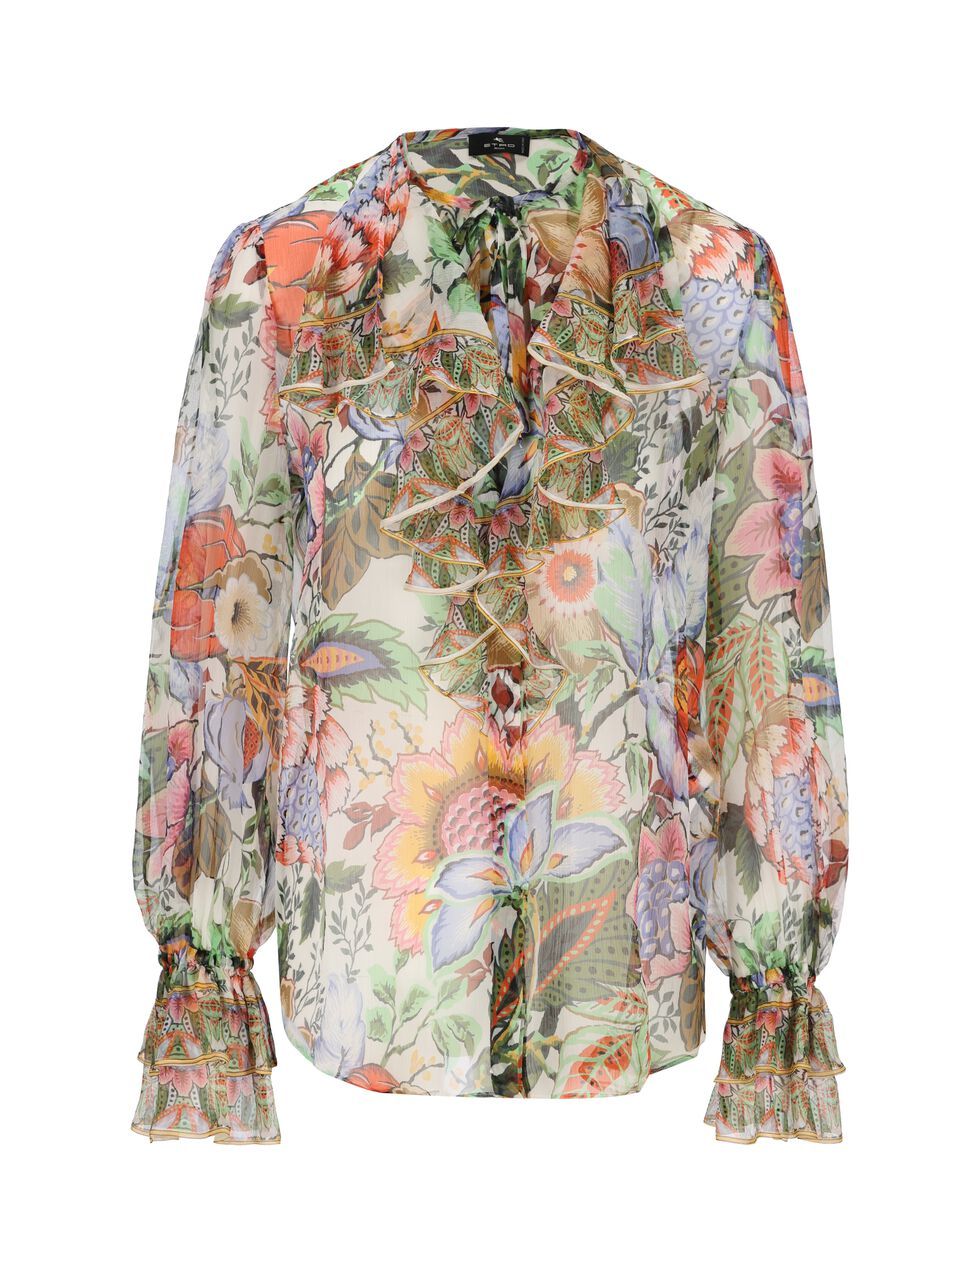 Multicolored Floral Print Silk Shirt - Ruffles, Long Sleeves, Button Fastening